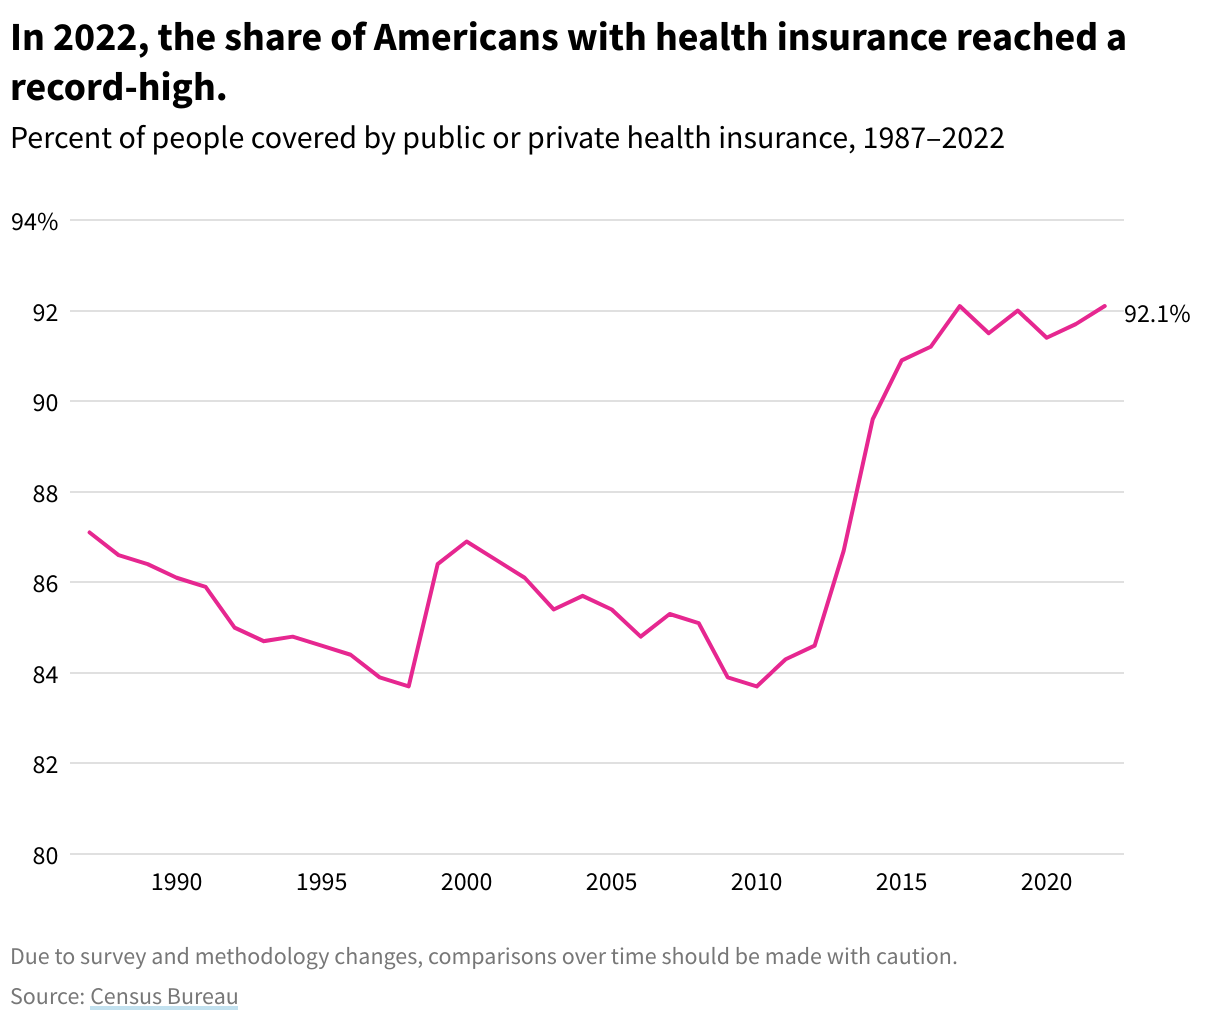 Line chart of the percent of people in the US with public or private health insurance from 1987 to 2022. In 2022, the rate was 92.1%. 